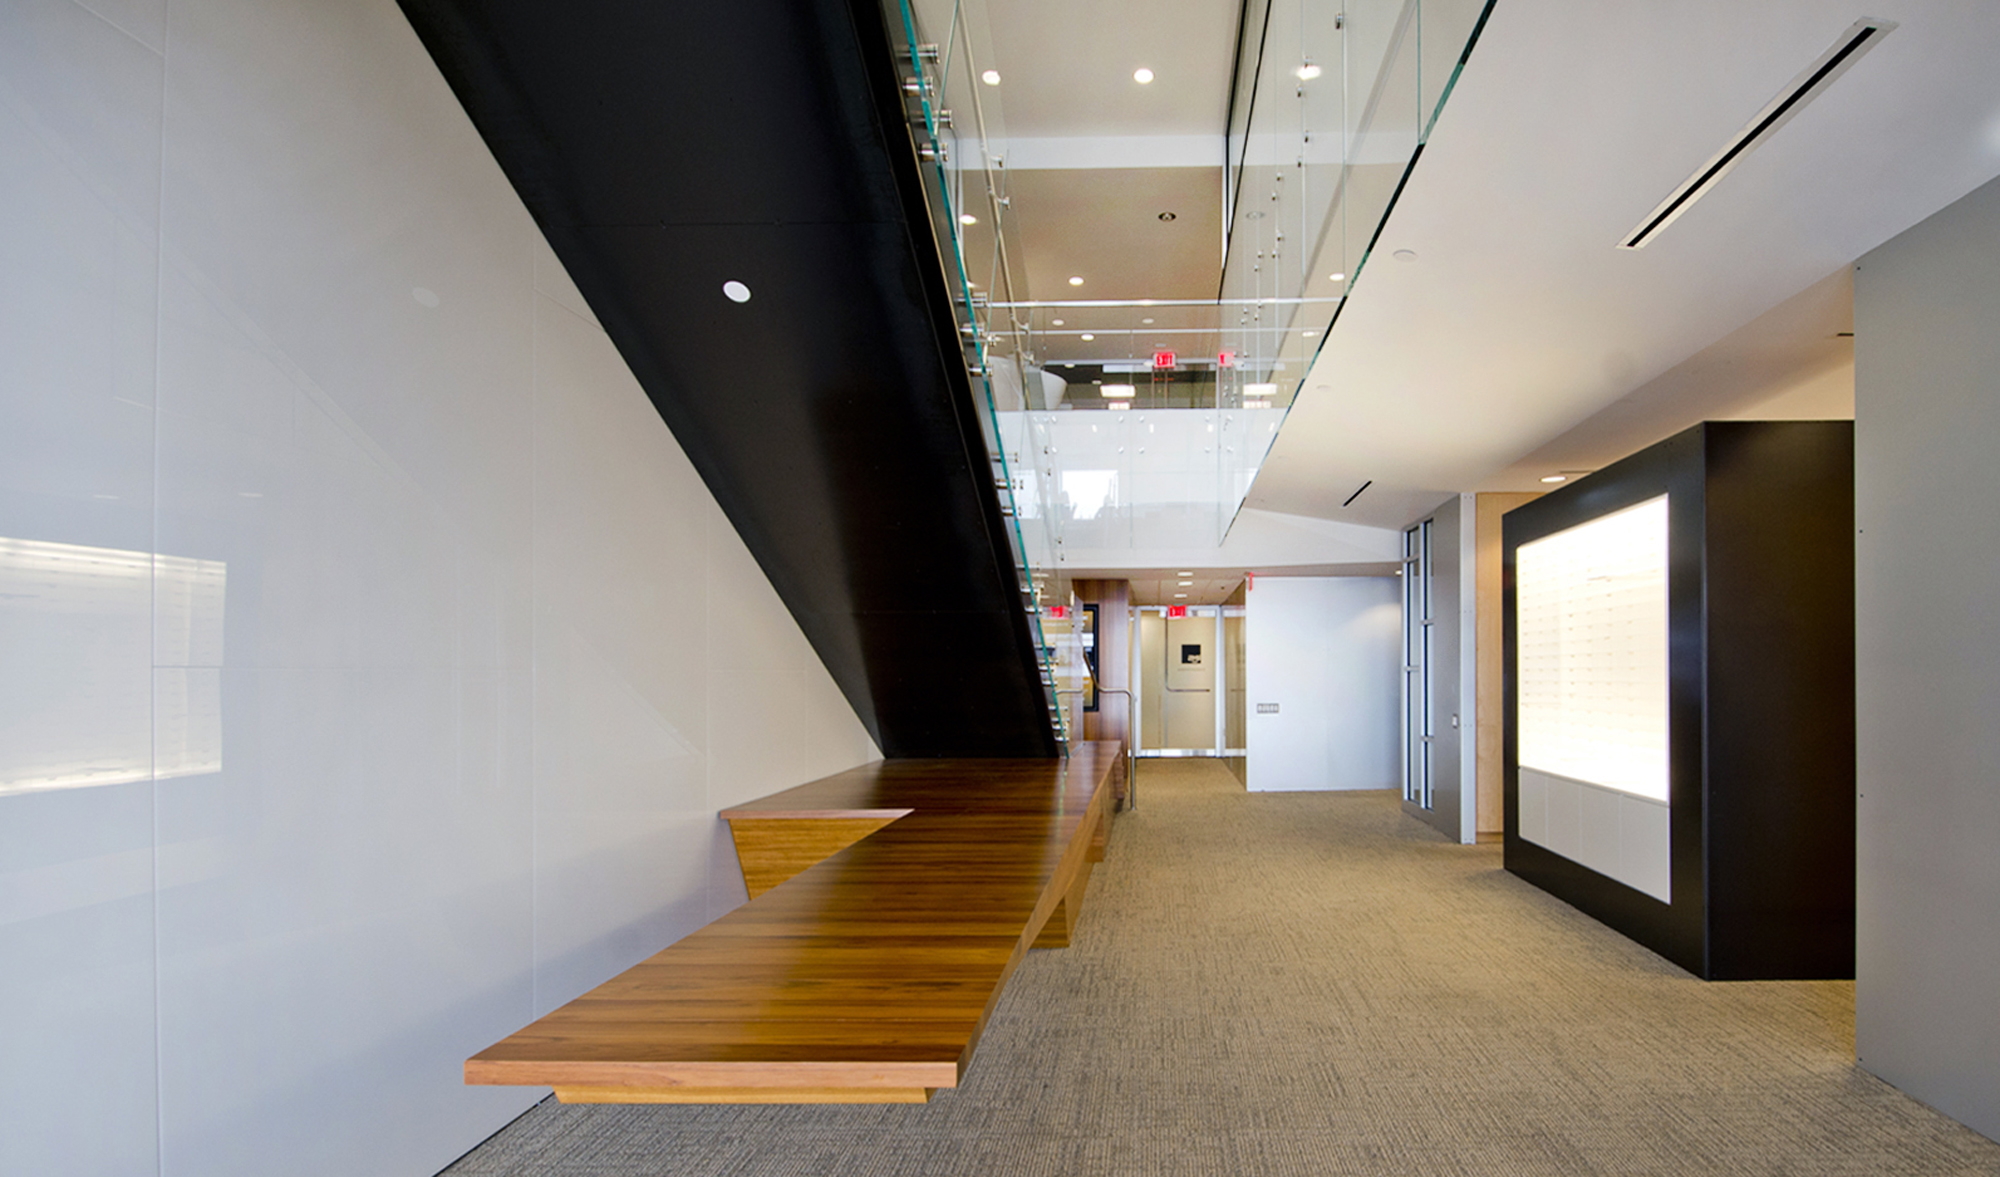 res4-resolution-4-architecture-modern-commercial-rms-riskmanagementsolutions-hoboken-newjersey-interior-office-lobby-mailbox-1.jpg